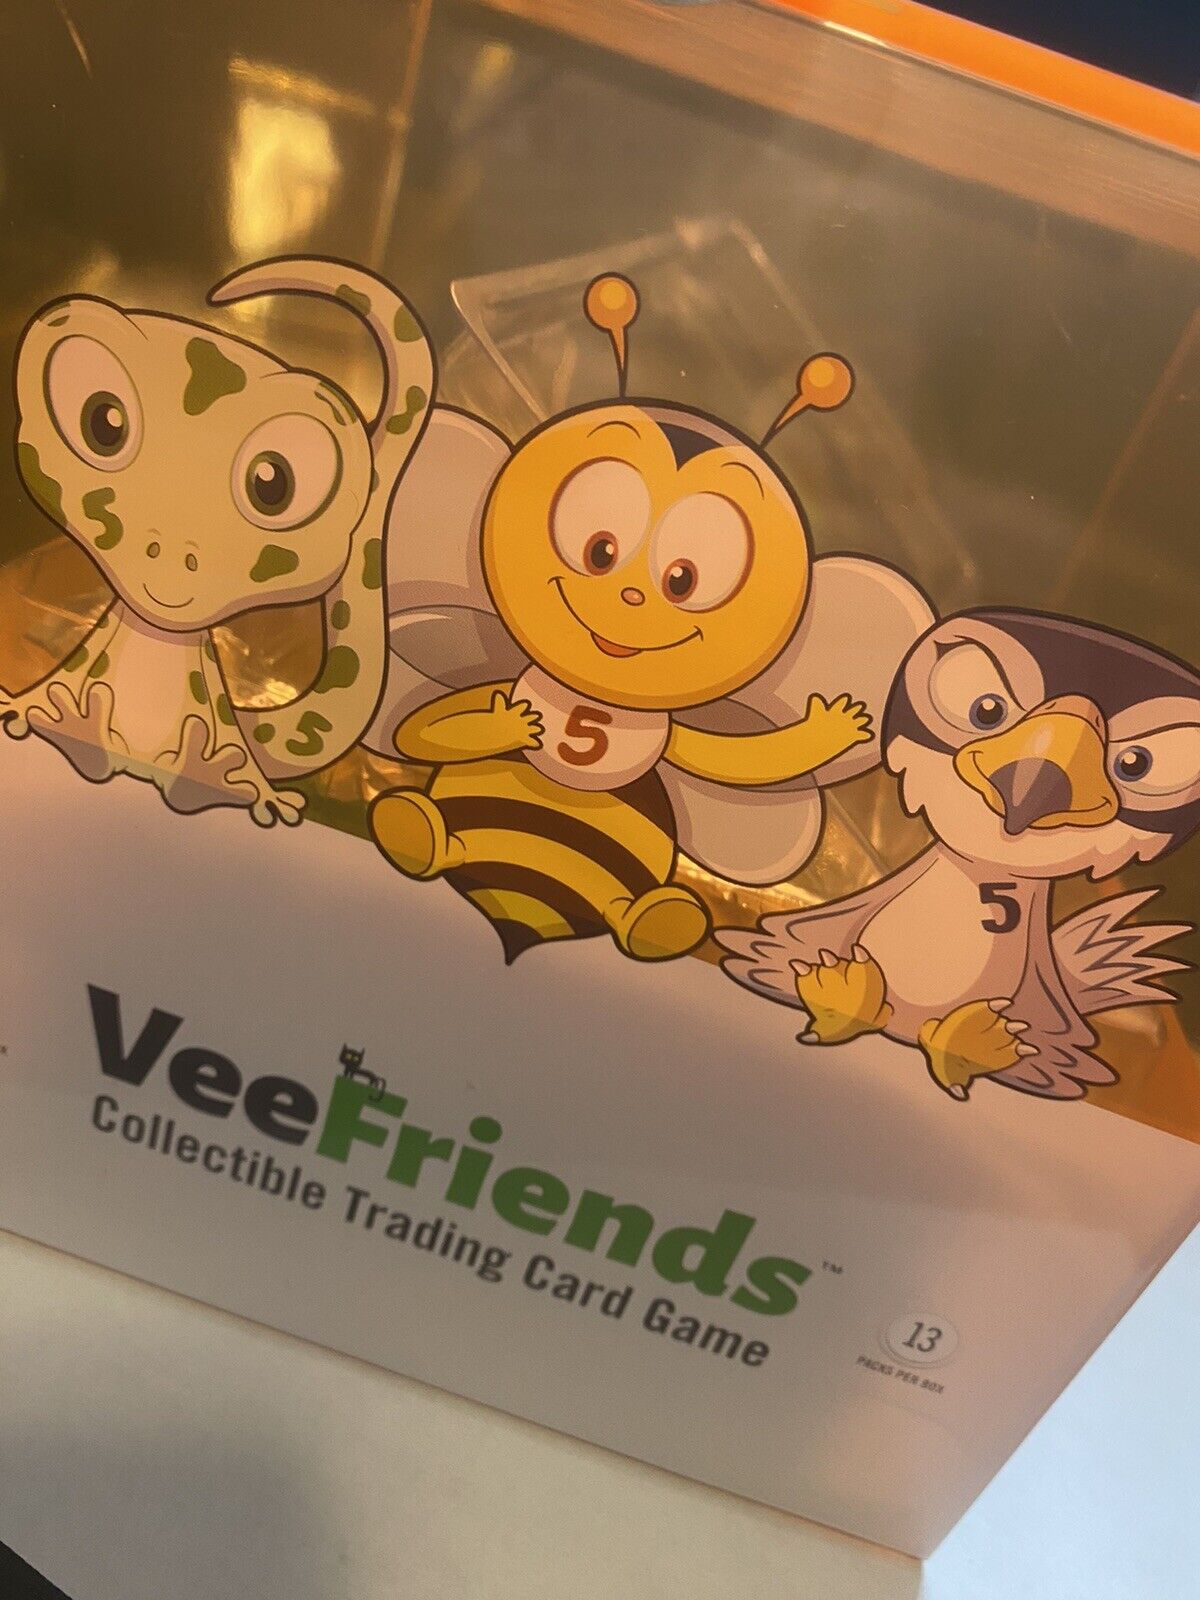 Bulk Lot of Veefriends compete and collect Cards